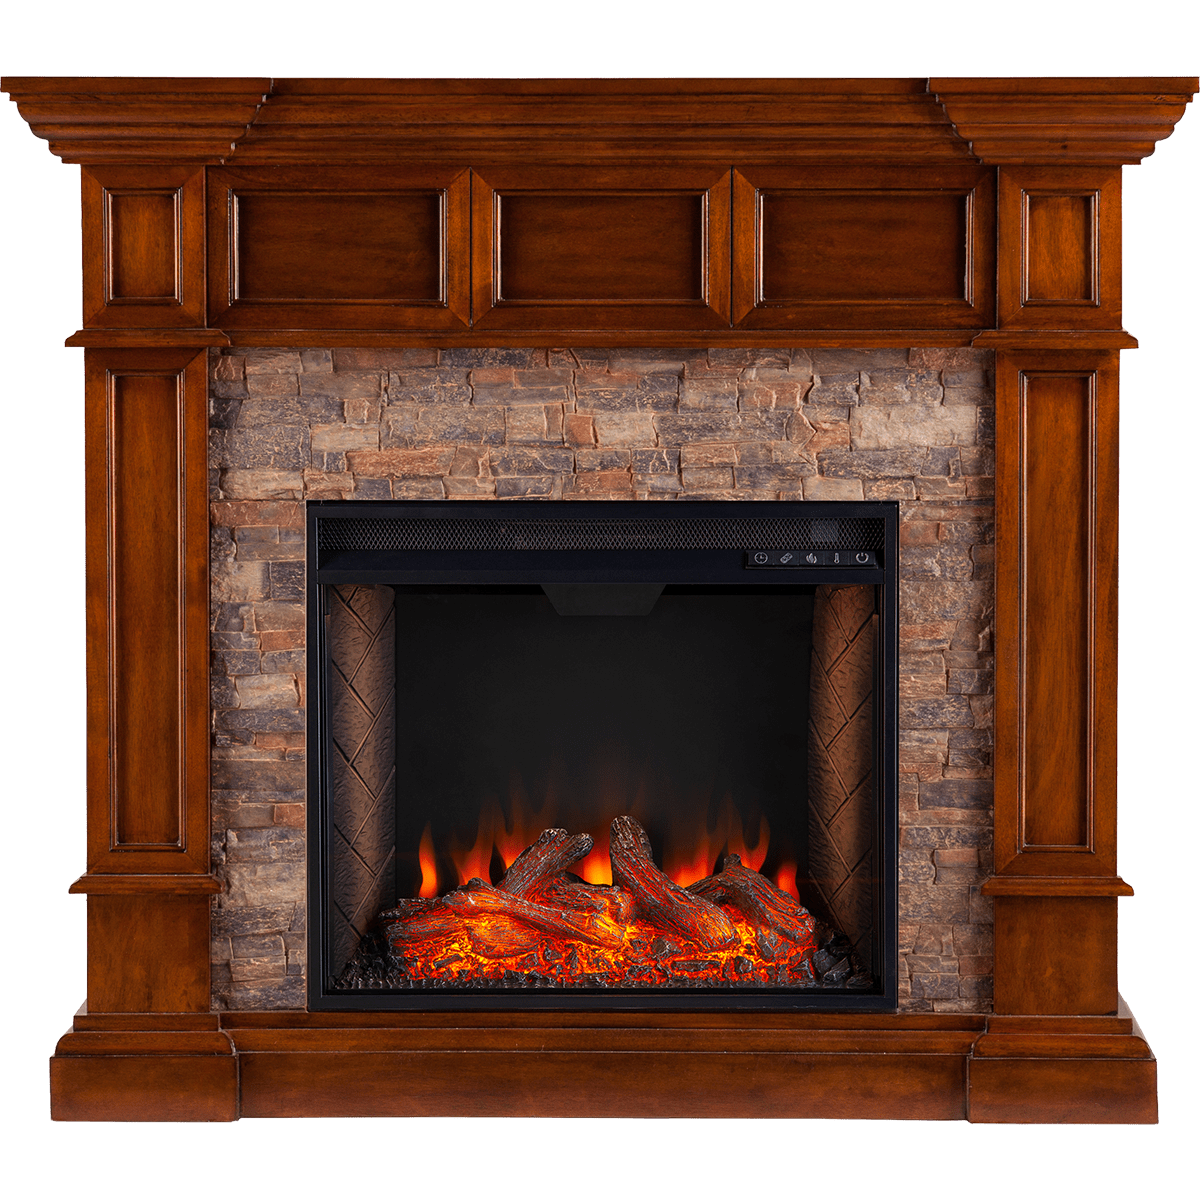 Faux Stone Electric Fireplace Tv Stand Unique southern Enterprises Merrimack Simulated Stone Convertible Electric Fireplace